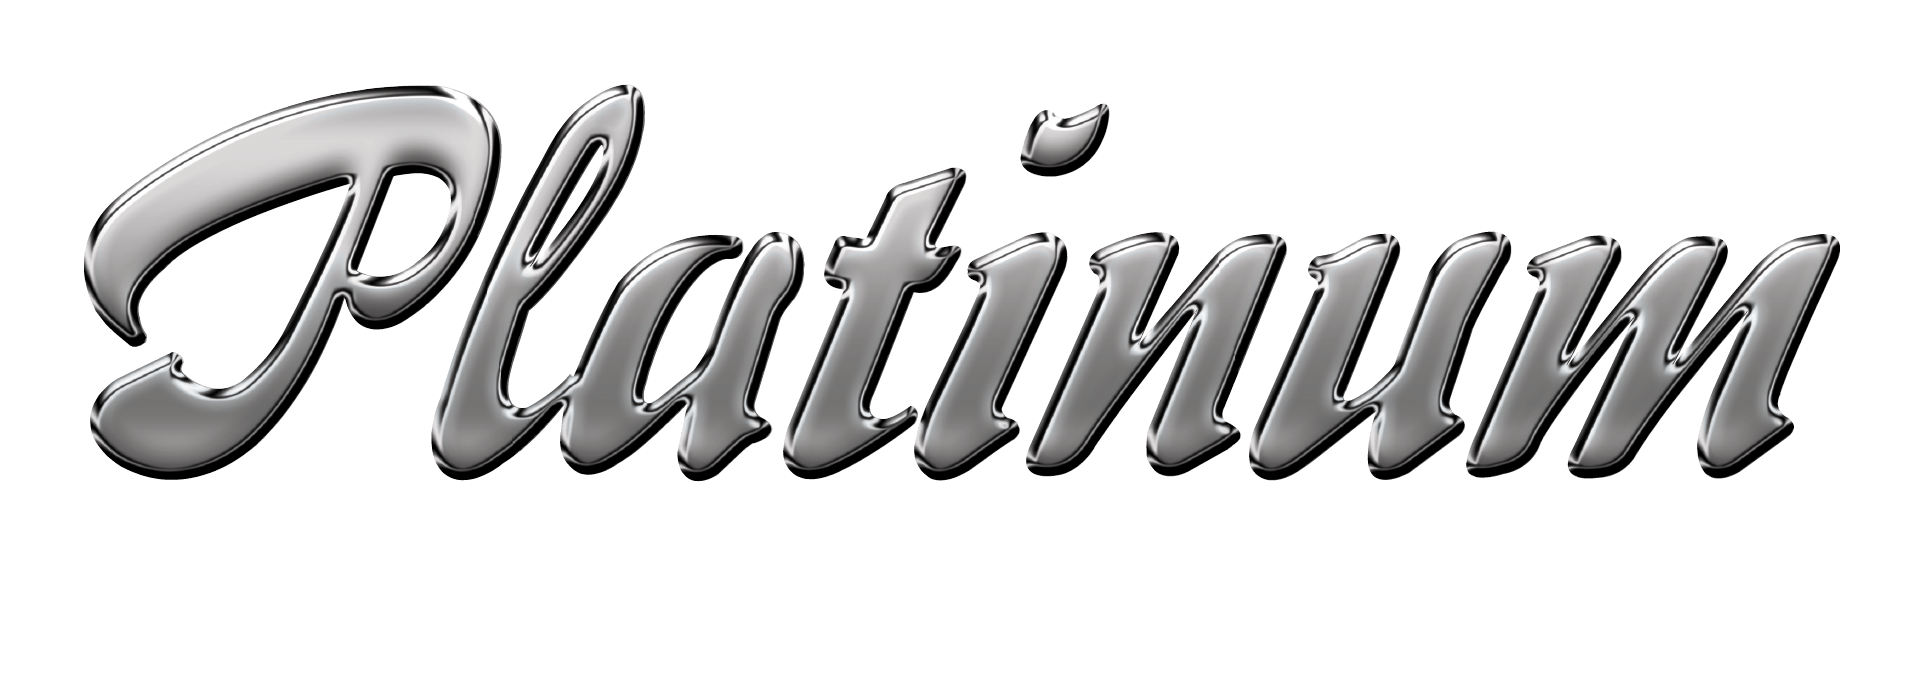 Platinum Roofing Specialists New Roofs and Re Roofing Sydney Large White Logo Platinum Roofing Specialists - New Roofs and Re Roofing Sydney - Large White Logo